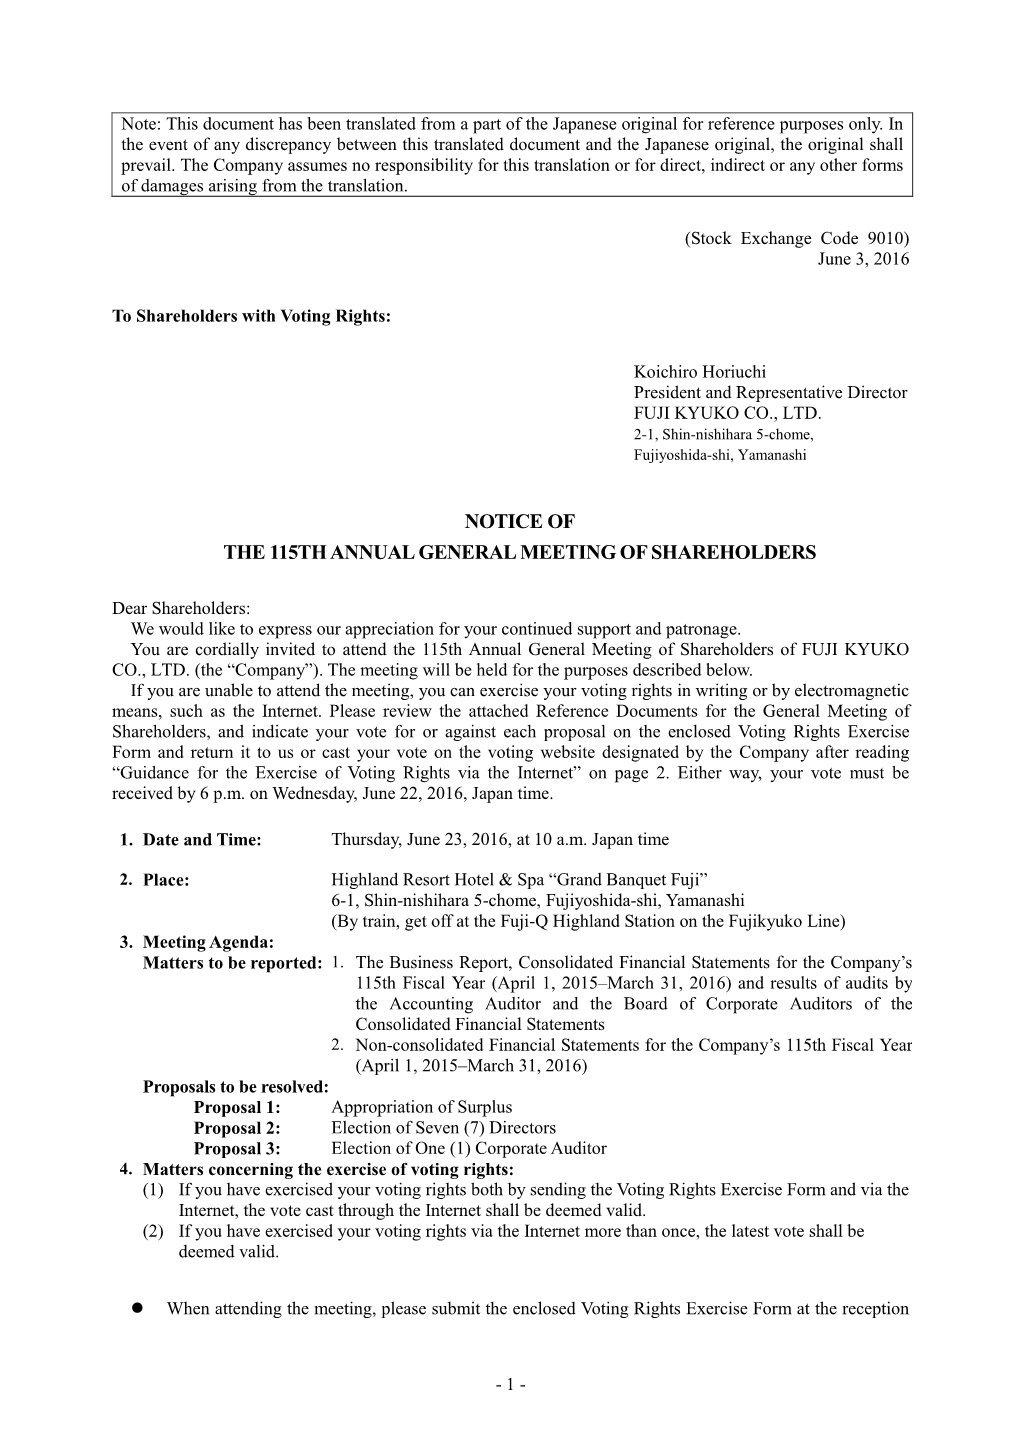 Notice of the 115Th Annual General Meeting of Shareholders